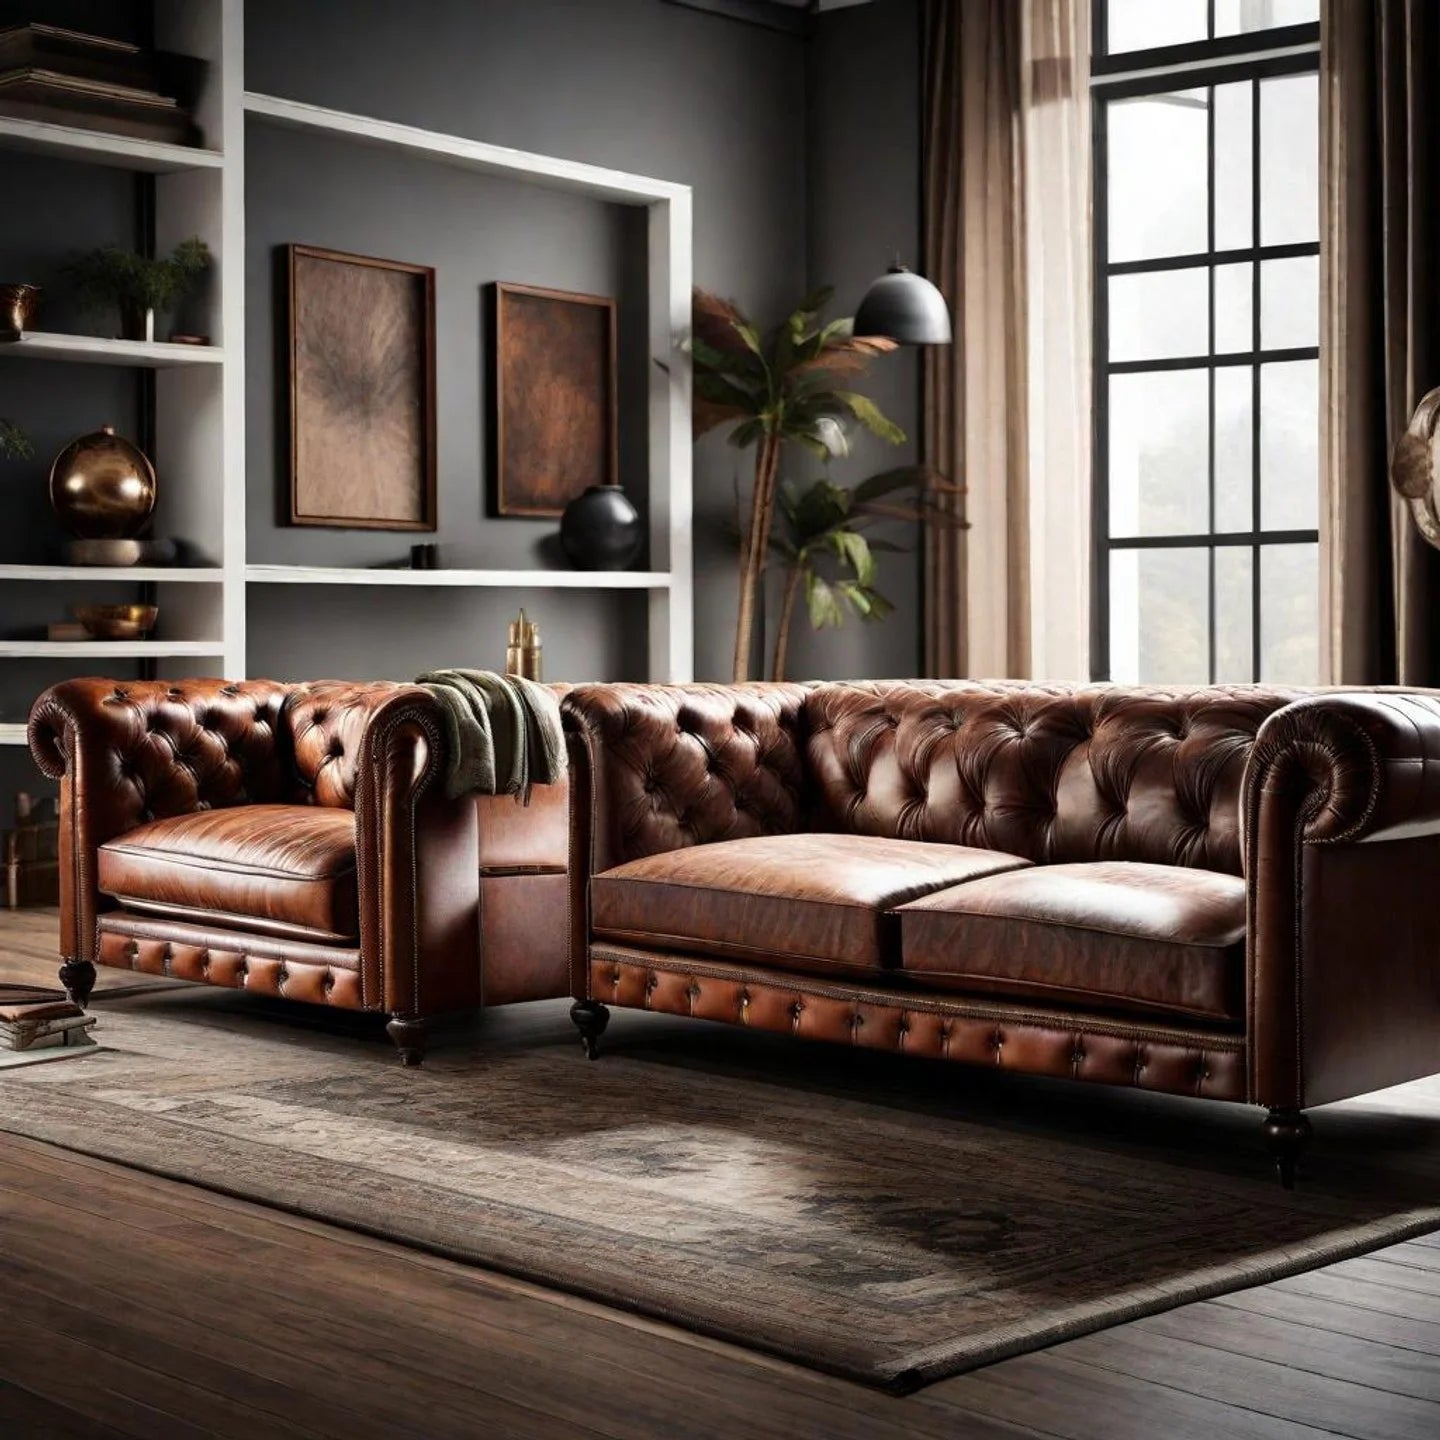 Leather vs Fabric Sofa: Which Sofa Material is Best for You?